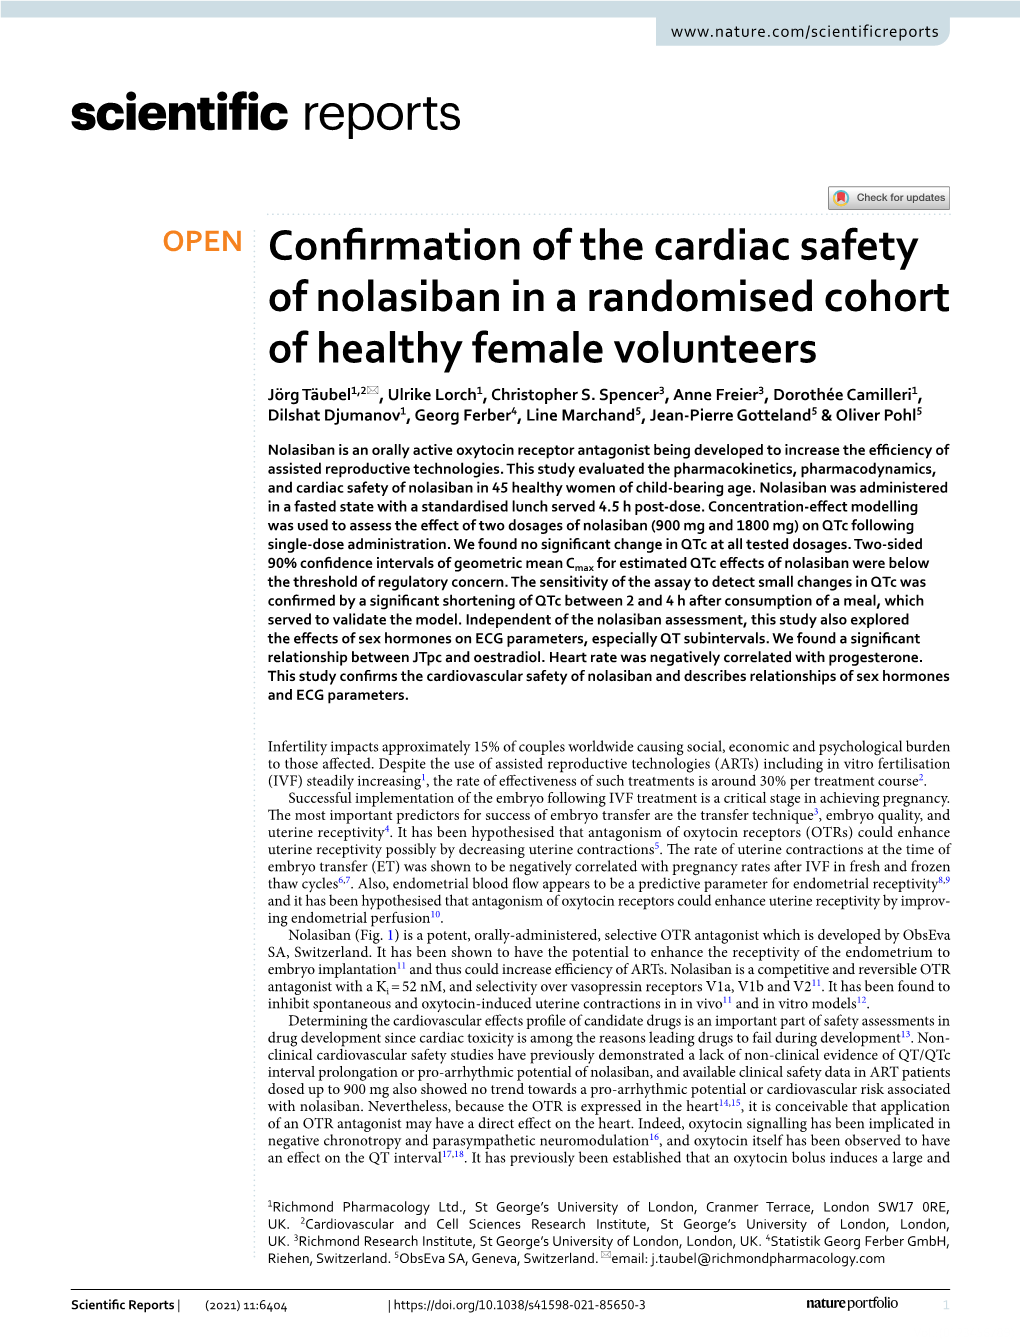 Confirmation of the Cardiac Safety of Nolasiban in a Randomised Cohort of Healthy Female Volunteers